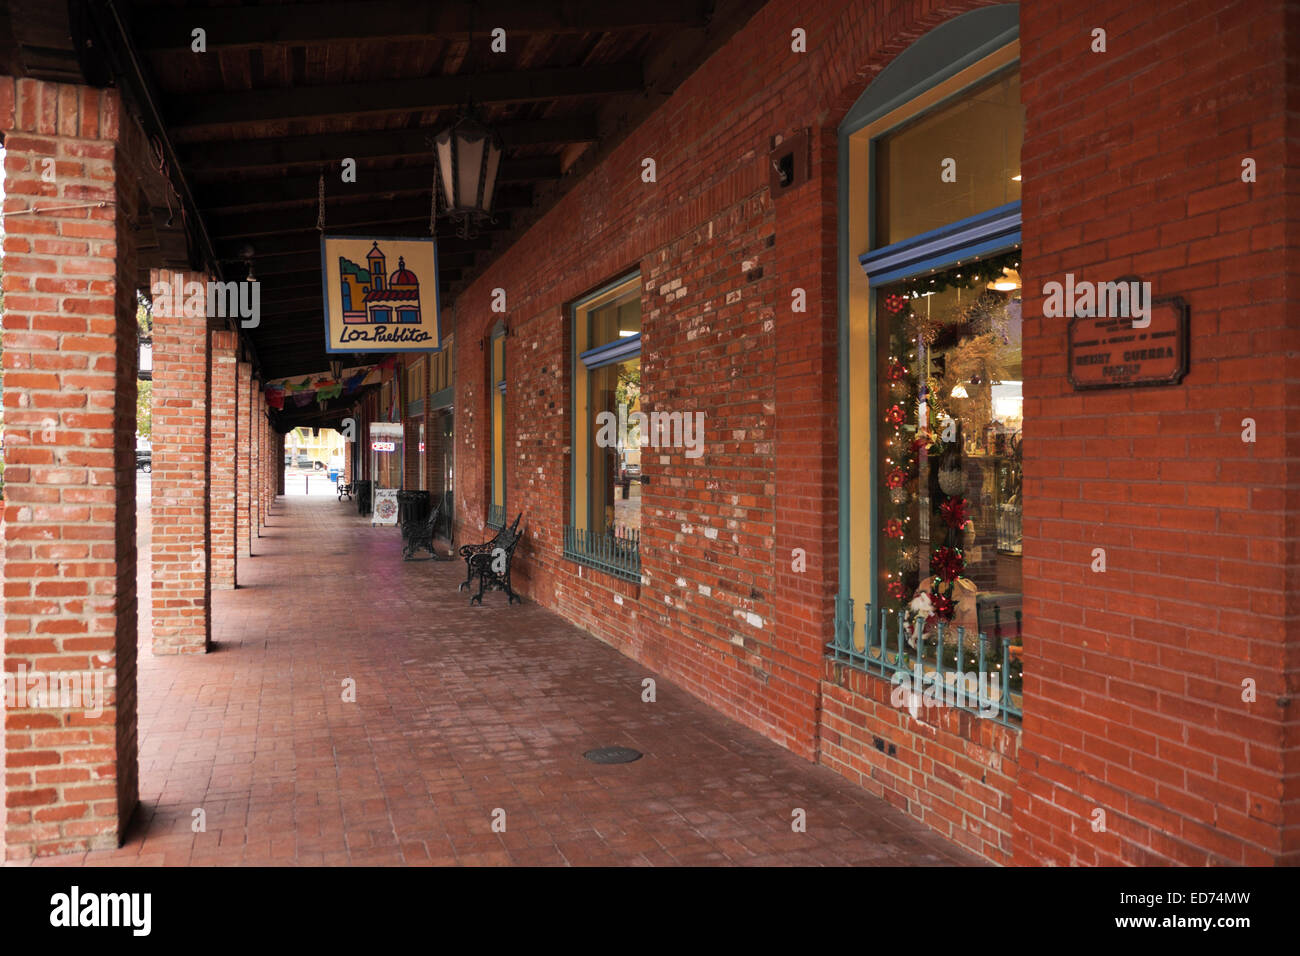 Covered walkway in Market Square, San Antonio, Texas.  It was early morning on a  rainy day during Christmas time. Stock Photo